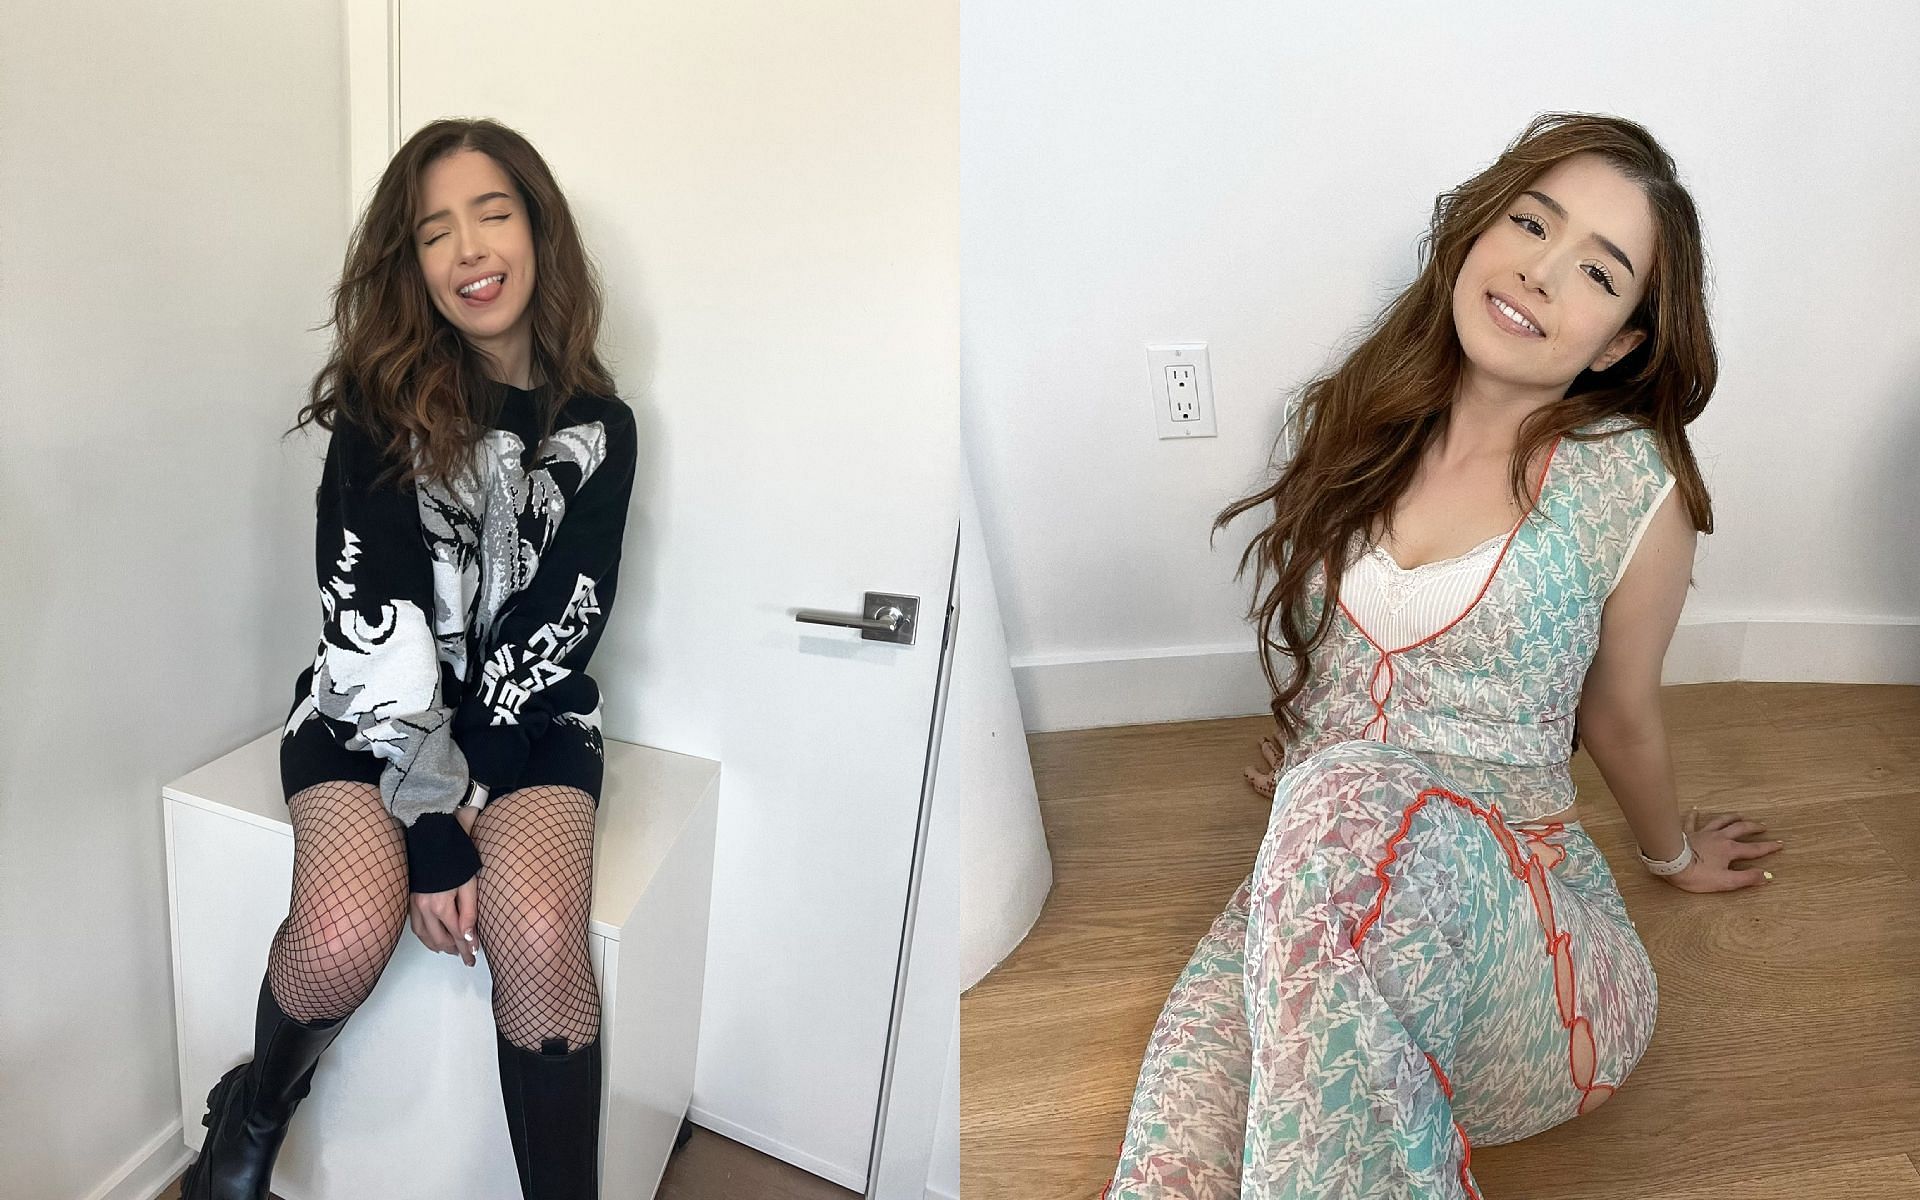 Imane teases a comeback stream, Twitter goes into a frenzy (Images via Pokimane/Twitter)